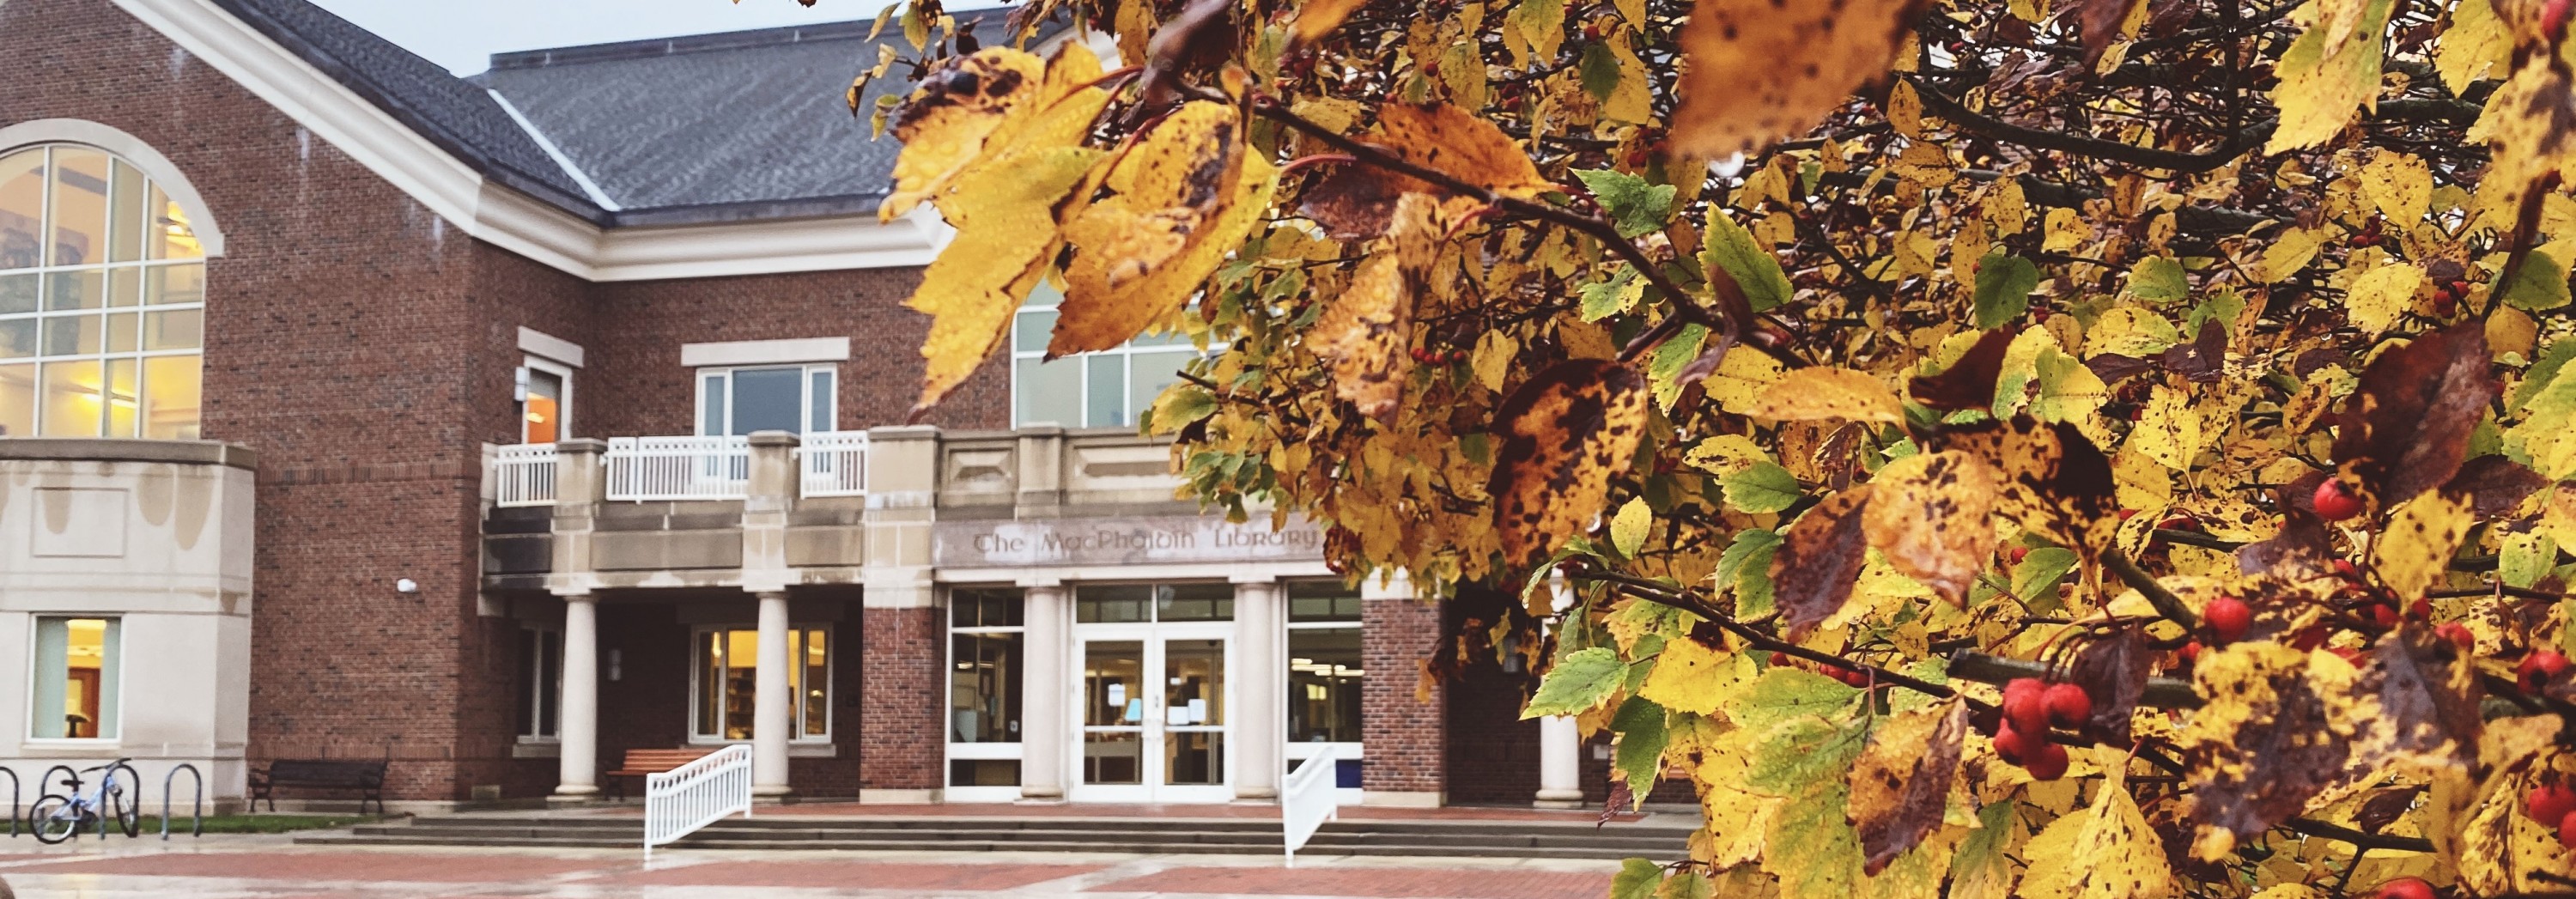 Library exterior in fall